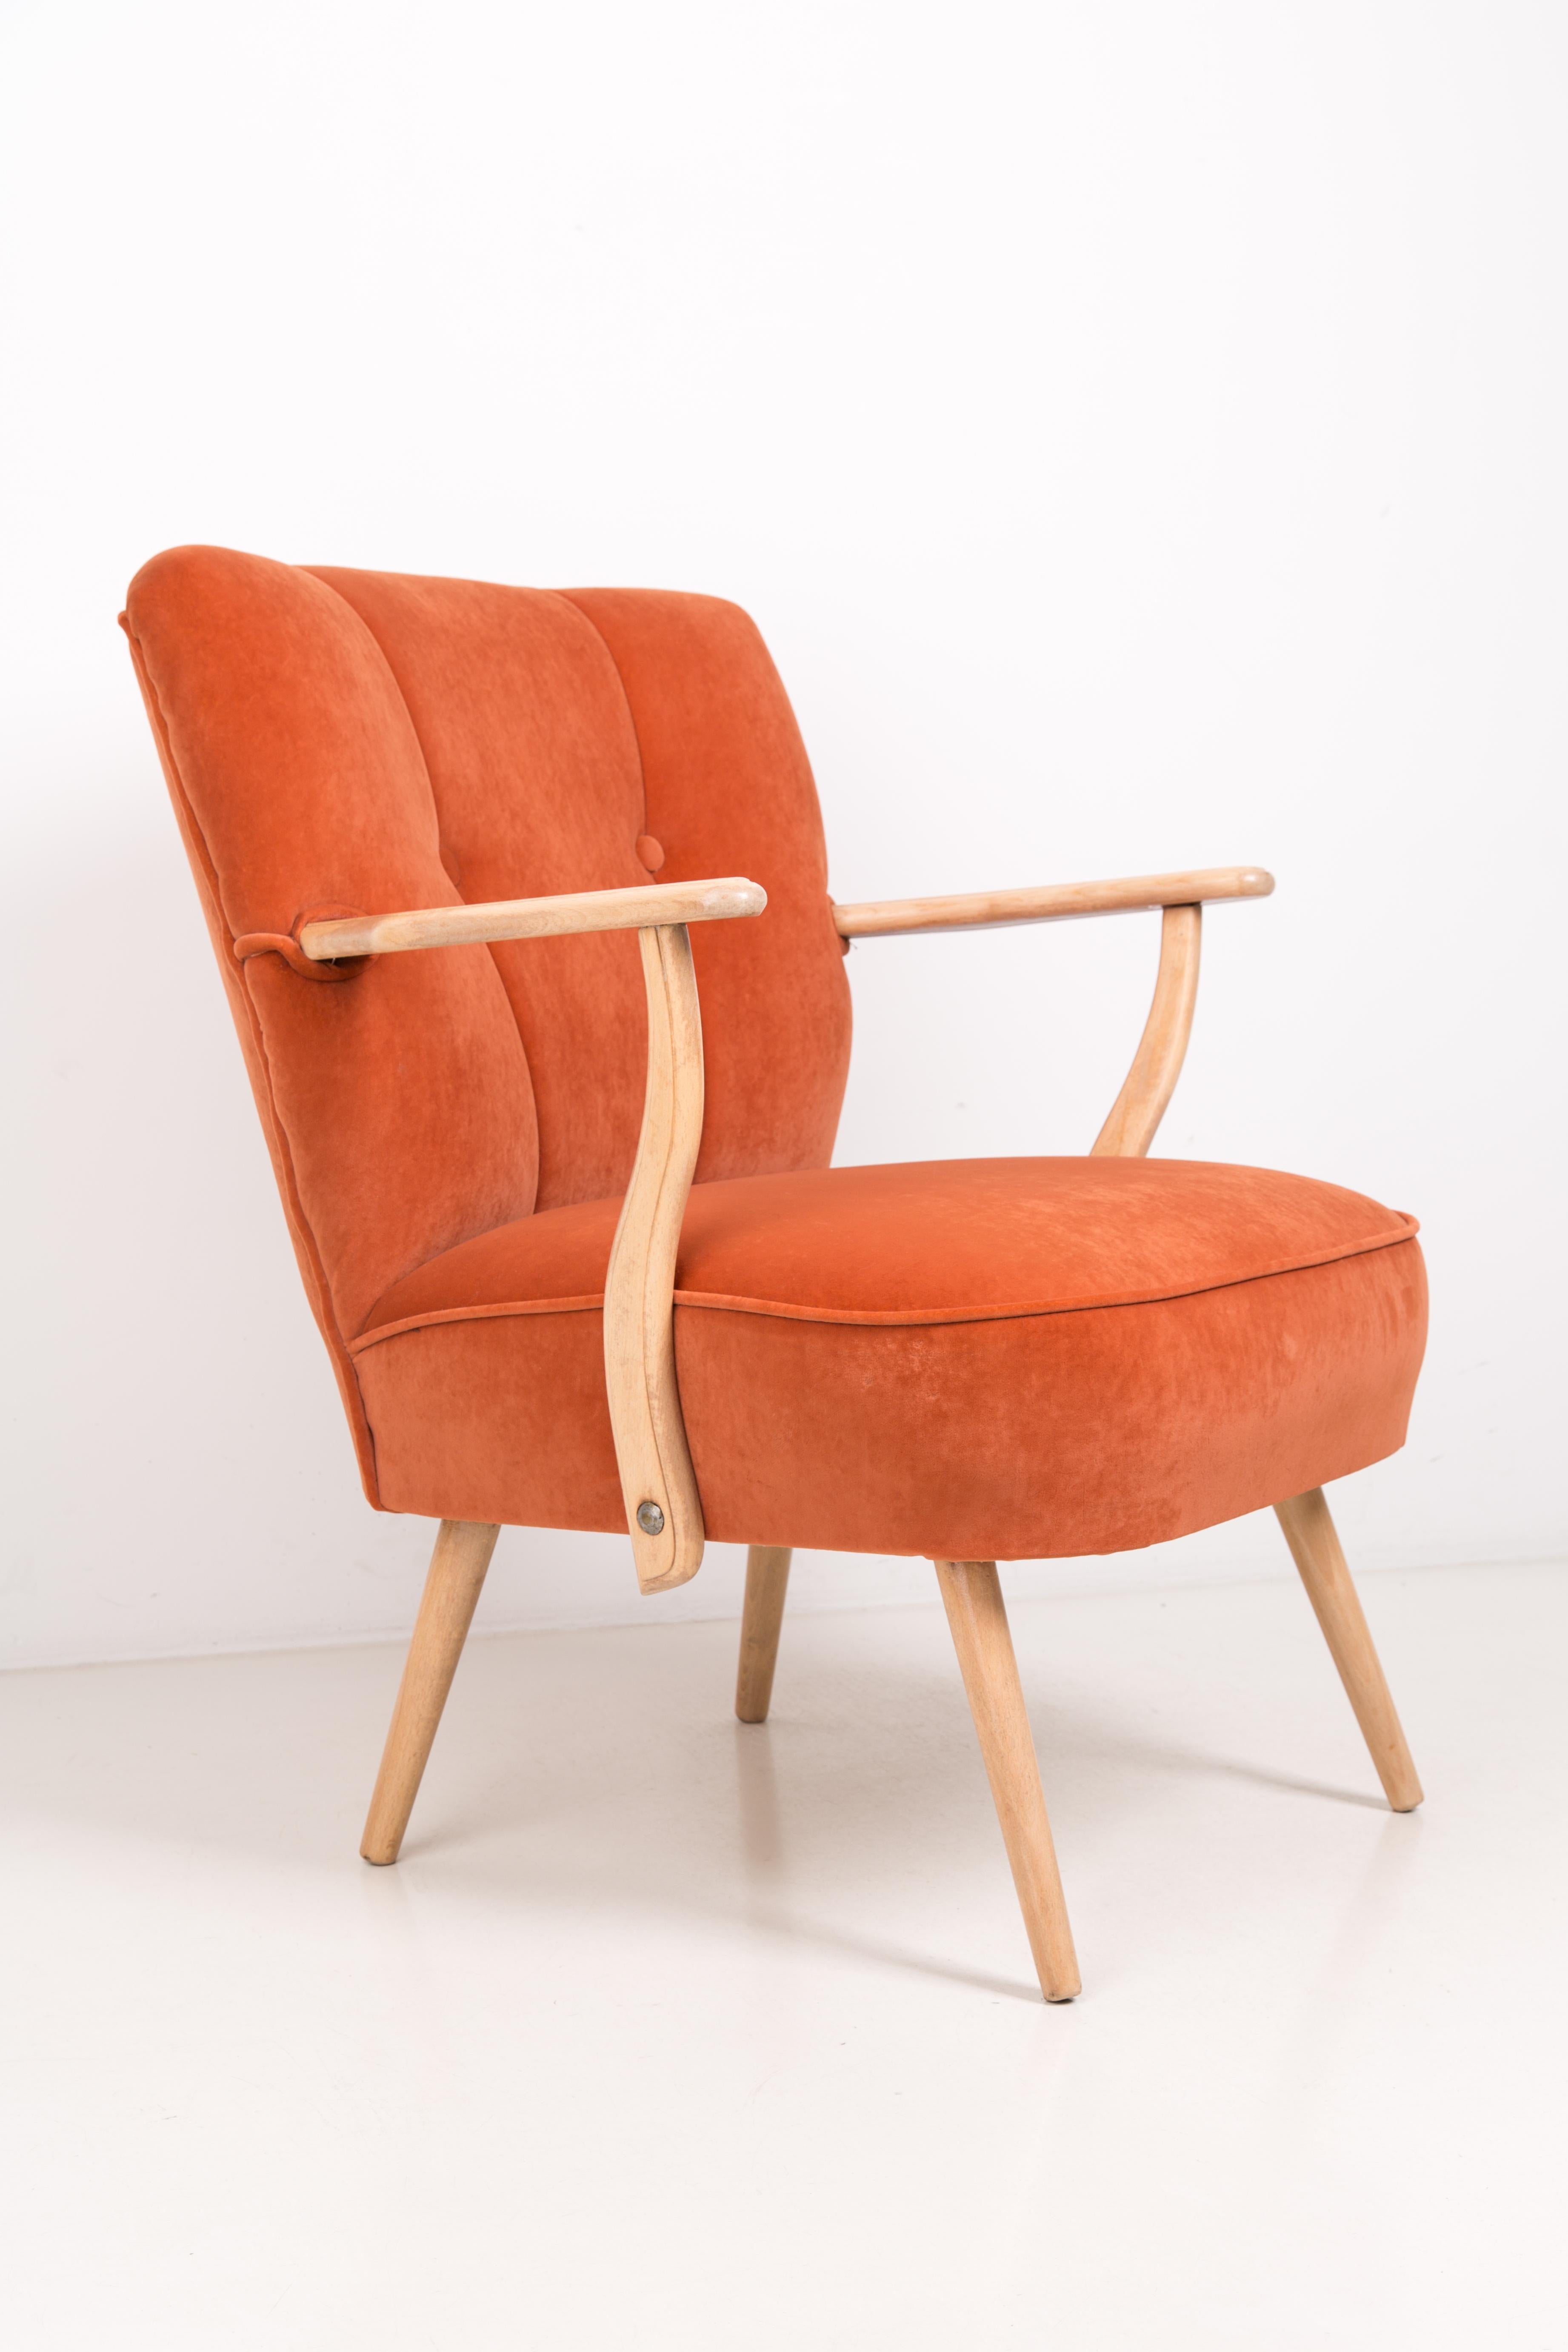 The armchairs with very comfortable, spring seats. Produced in 1960s in Germany. The armrests are made of beechwood, thoroughly cleaned and finished with matte varnish. The upholstery that the seat has been trimmed is high quality made of